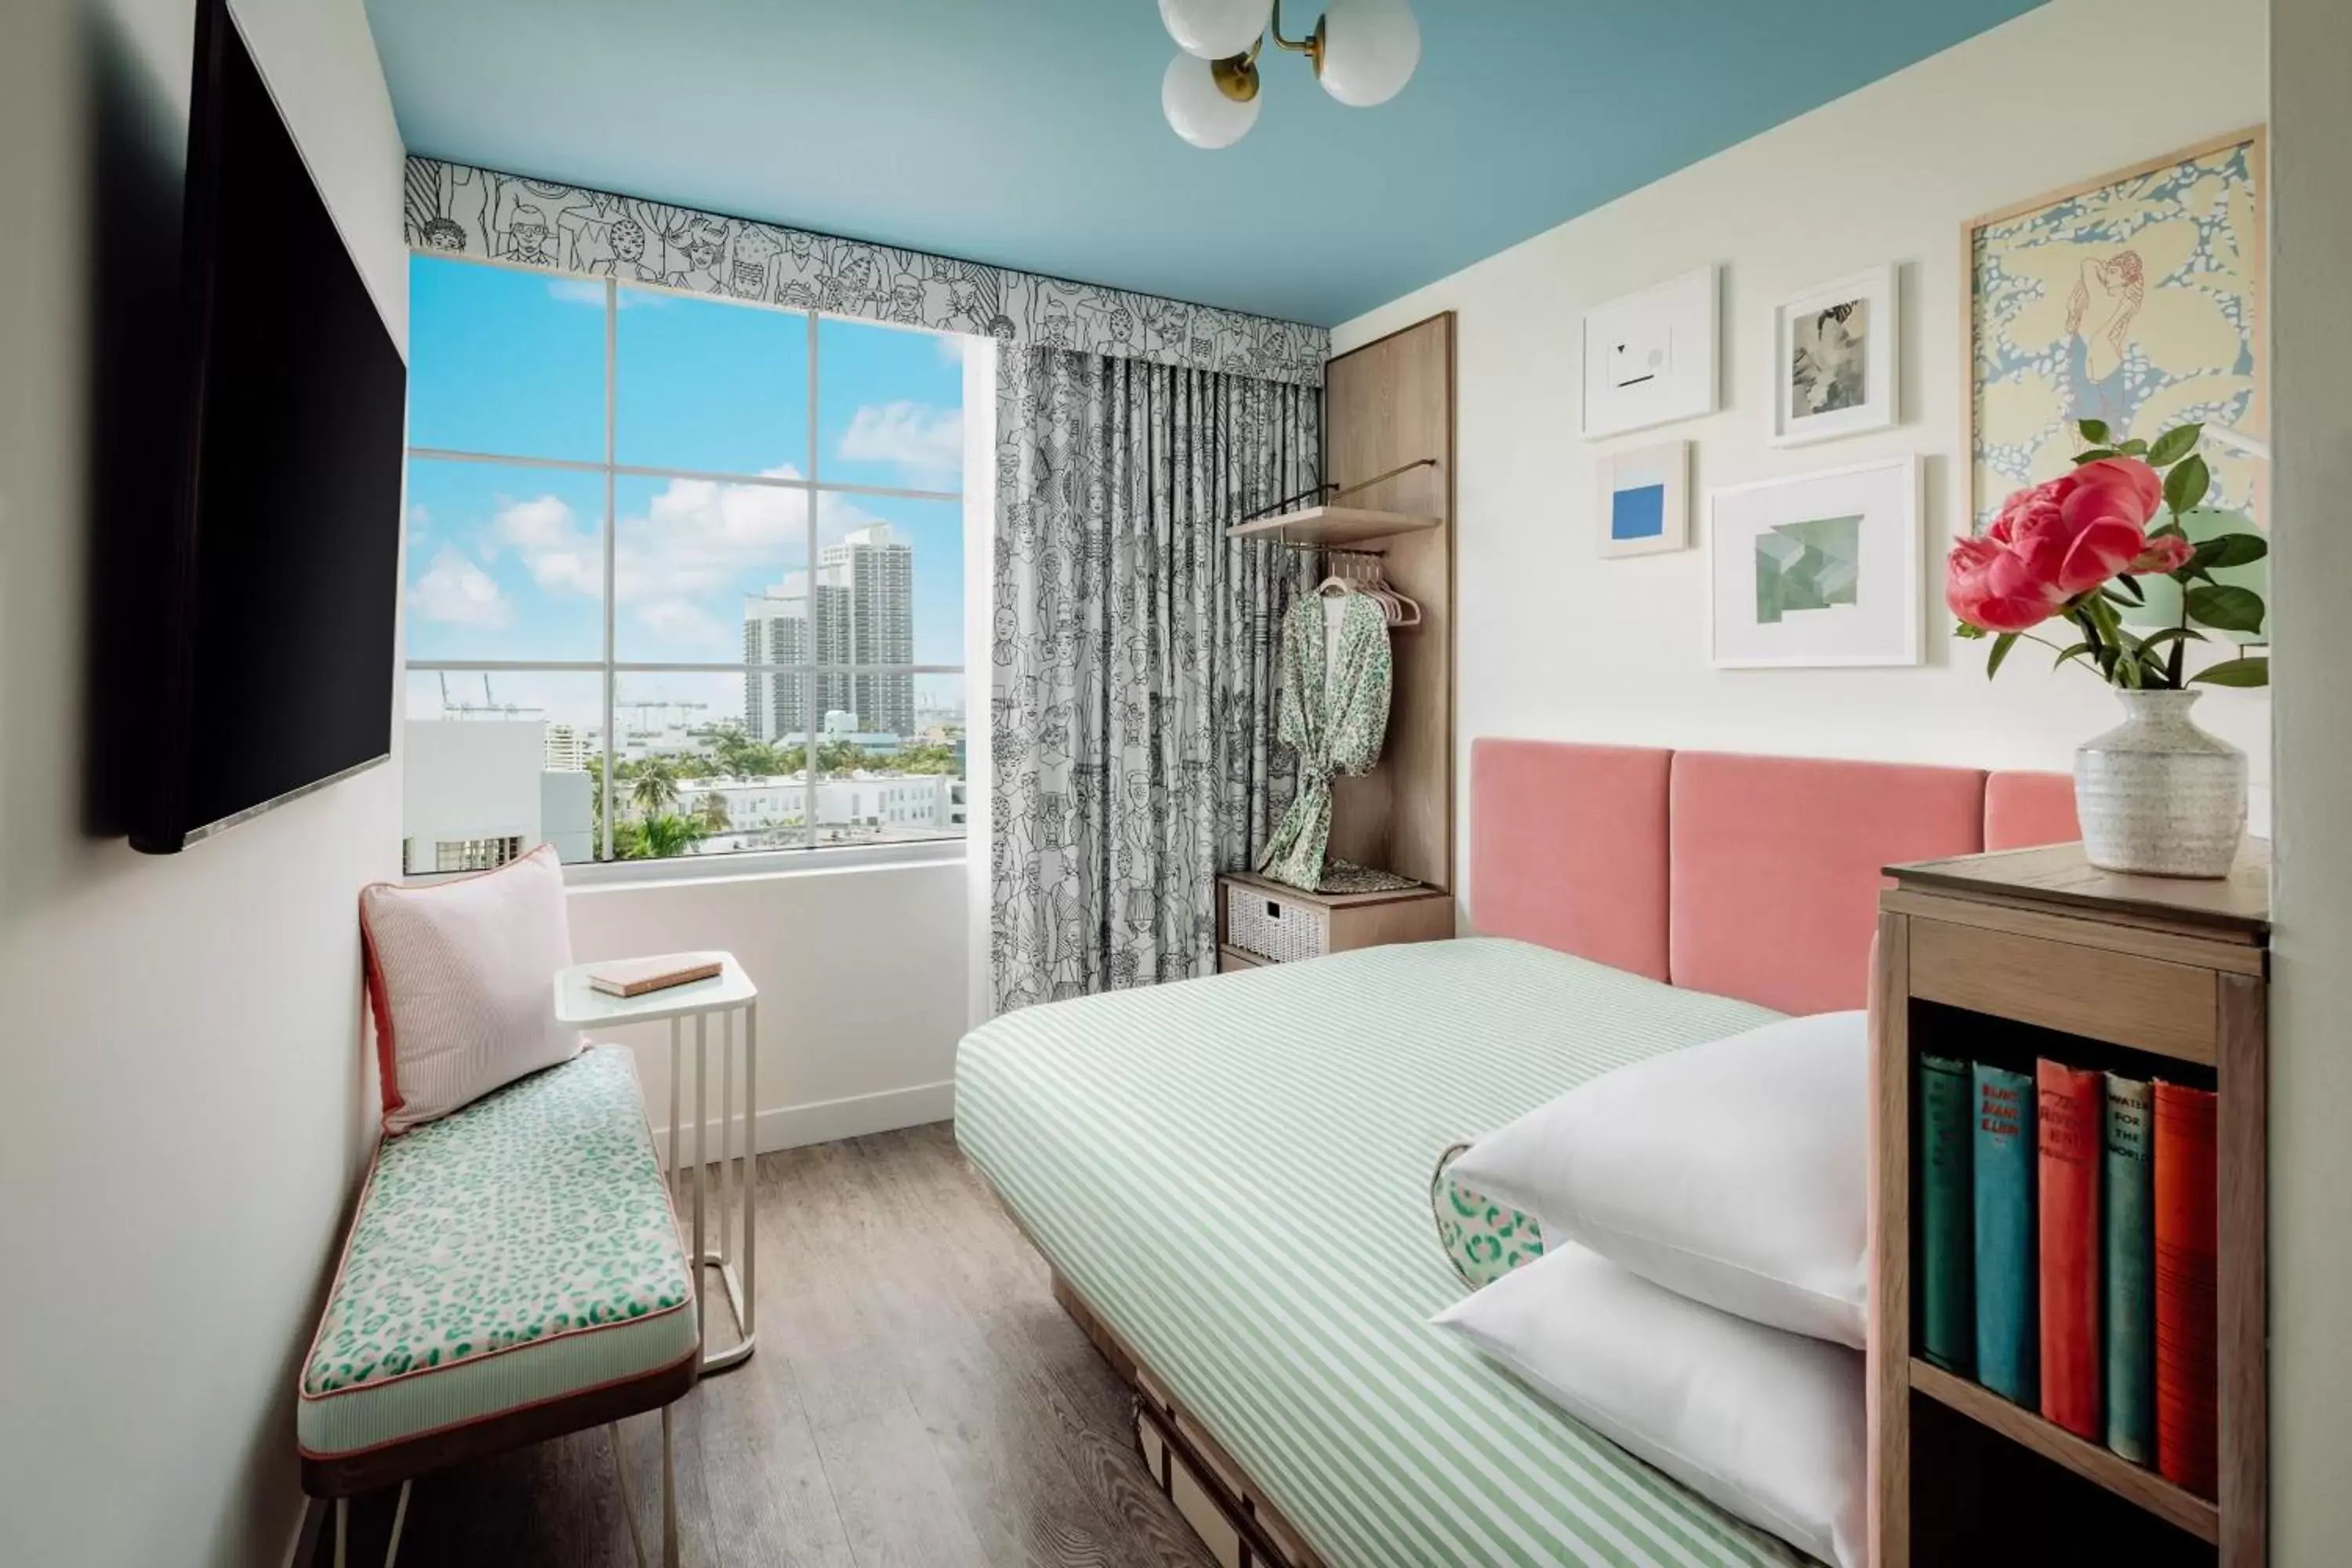 Standard Queen Room with City View in The Goodtime Hotel